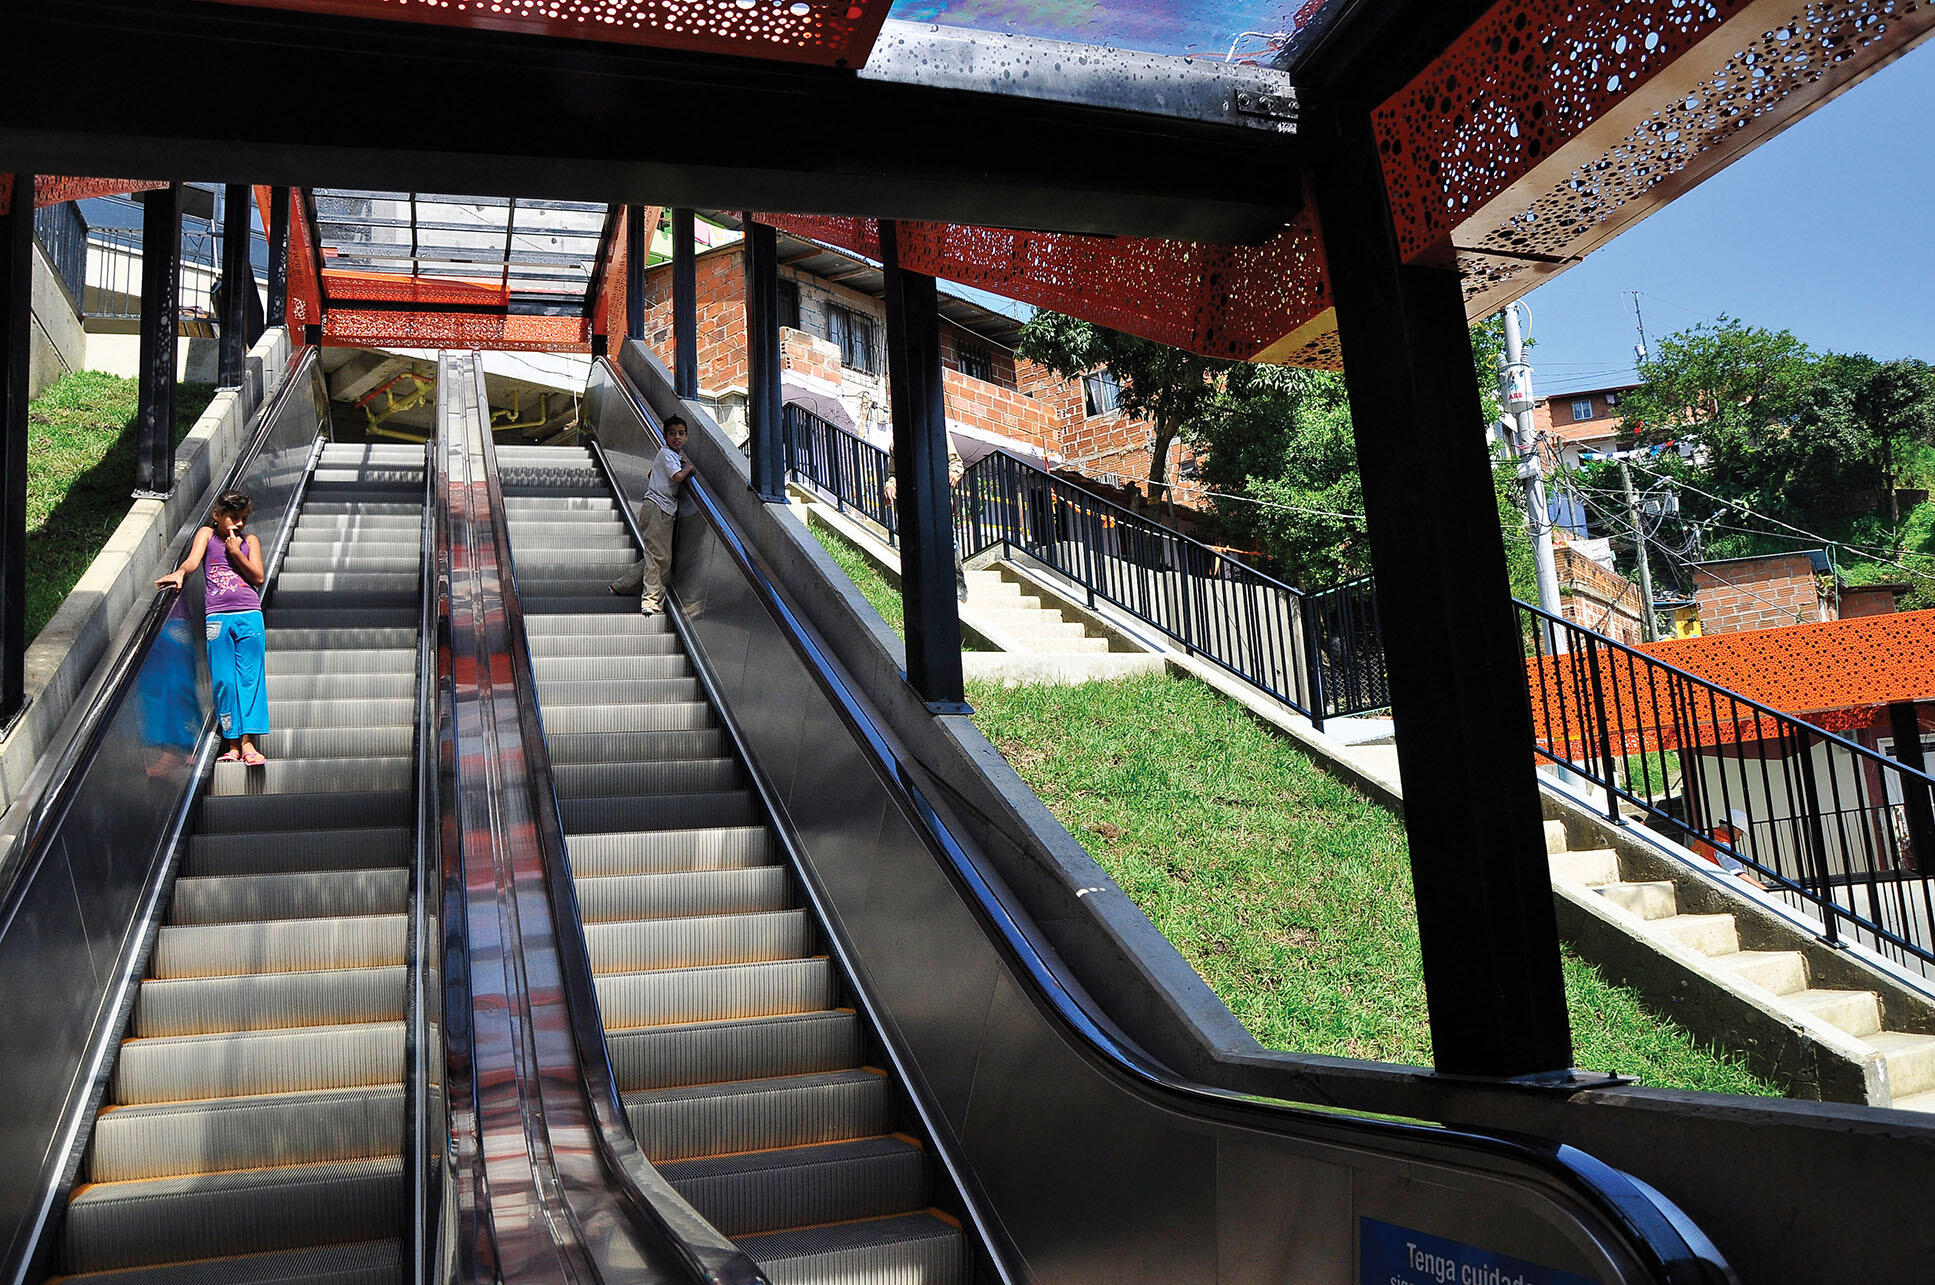 One of the escalators built to serve poor hillside communities in Medellín. (Photo by Mariana Gil/EMBARQBrasil.)